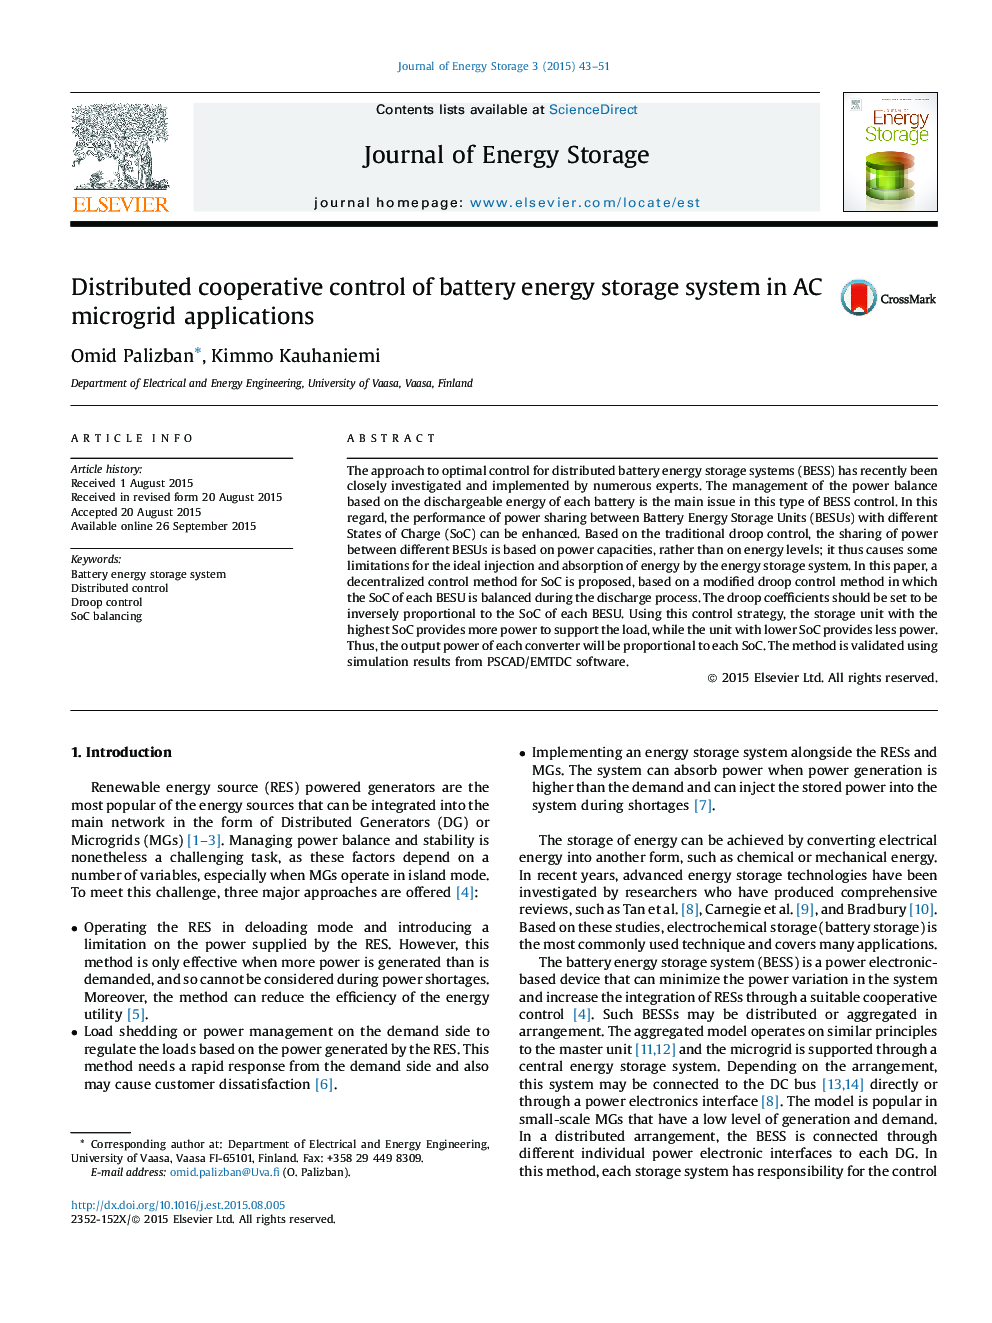 Distributed cooperative control of battery energy storage system in AC microgrid applications